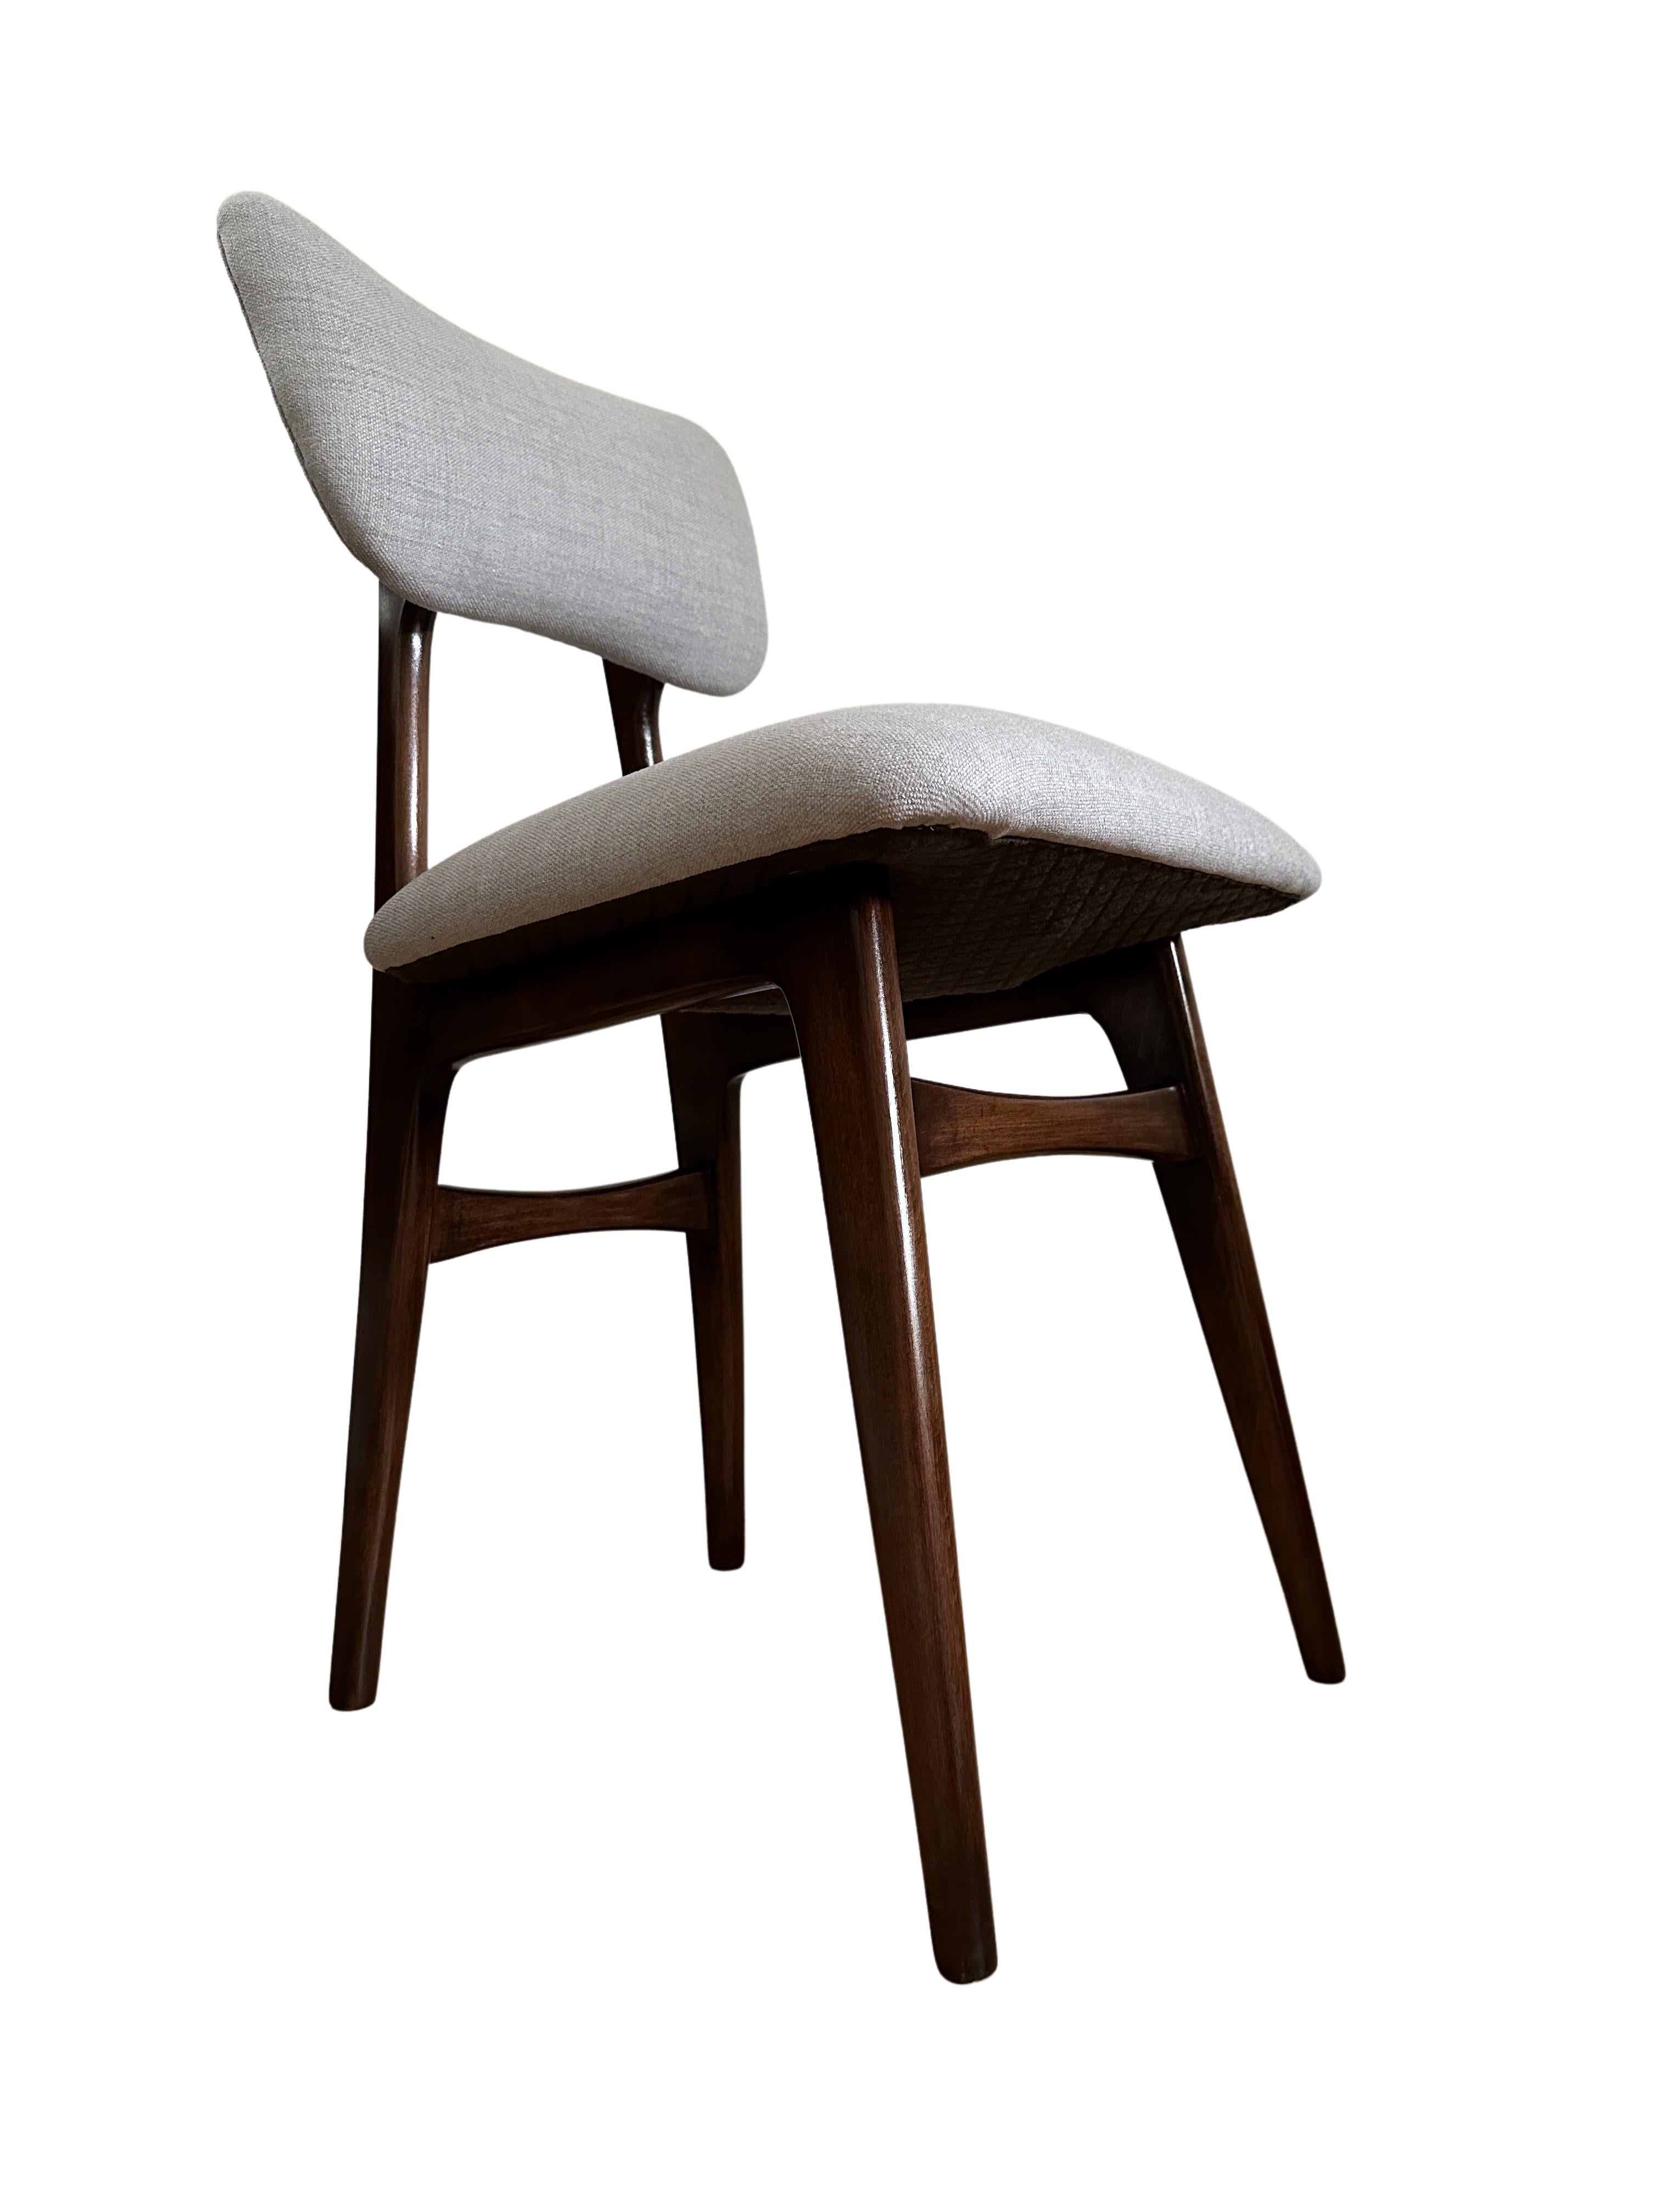 Set of 2 Midcentury Beige and Grey Dining Chairs, Europe, 1960s For Sale 3